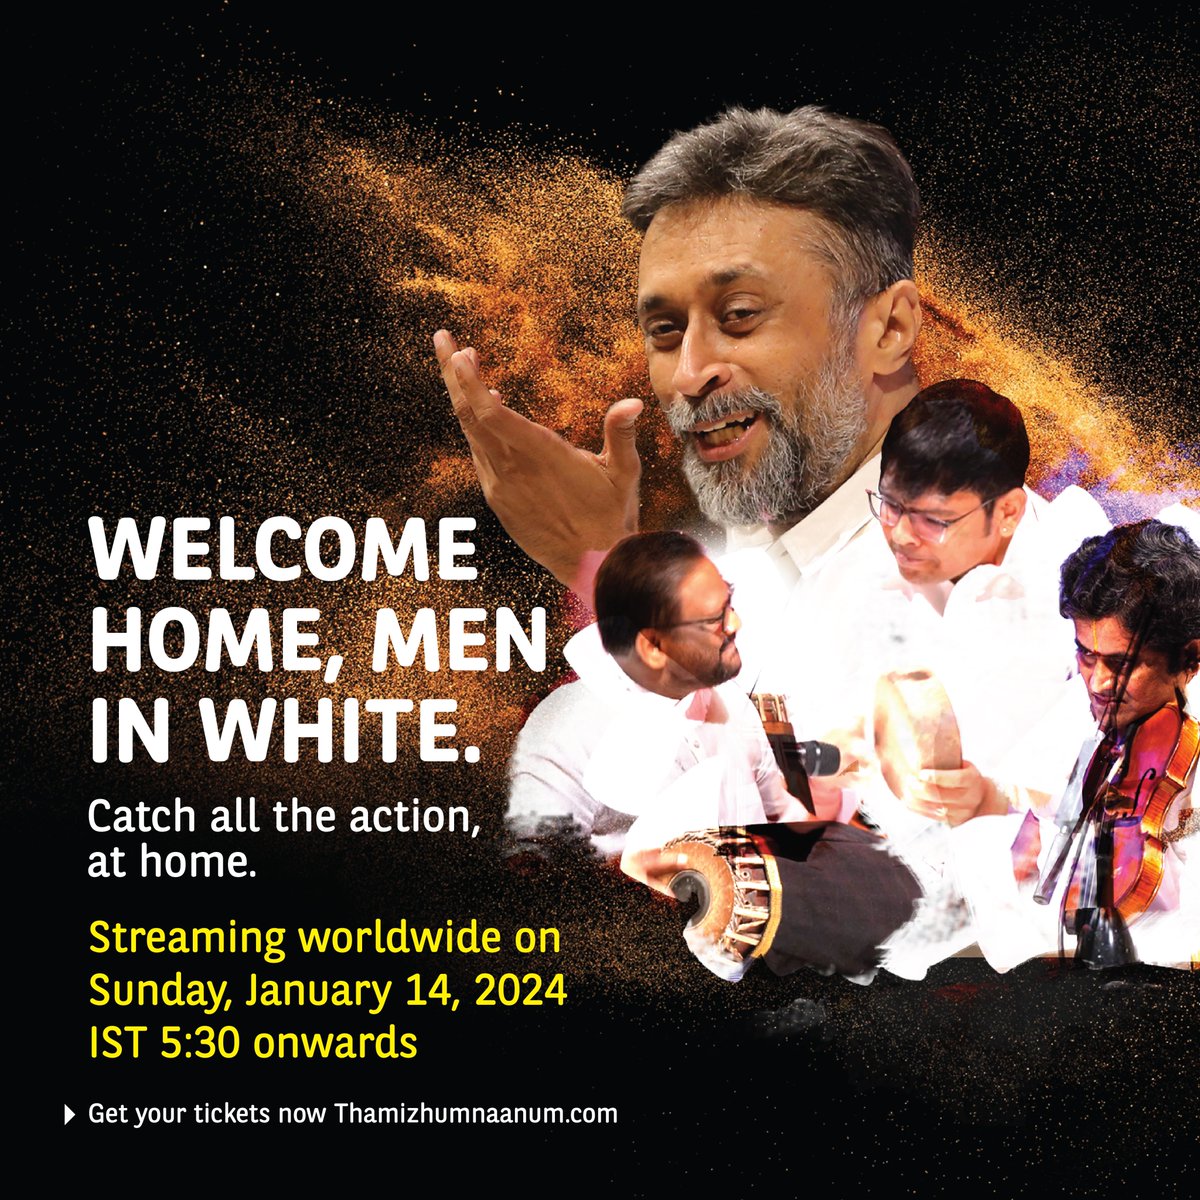 Goodbye, December. Hello again, Thamizhum Naanum! The Men in White are coming to your home this January. Get ready to take the virtual front seat. Now available for purchase at thamizhumnaanum.com @sanjaysub . . #sanjaysubrahmanyan #chennai #event #eventplanner #virtual